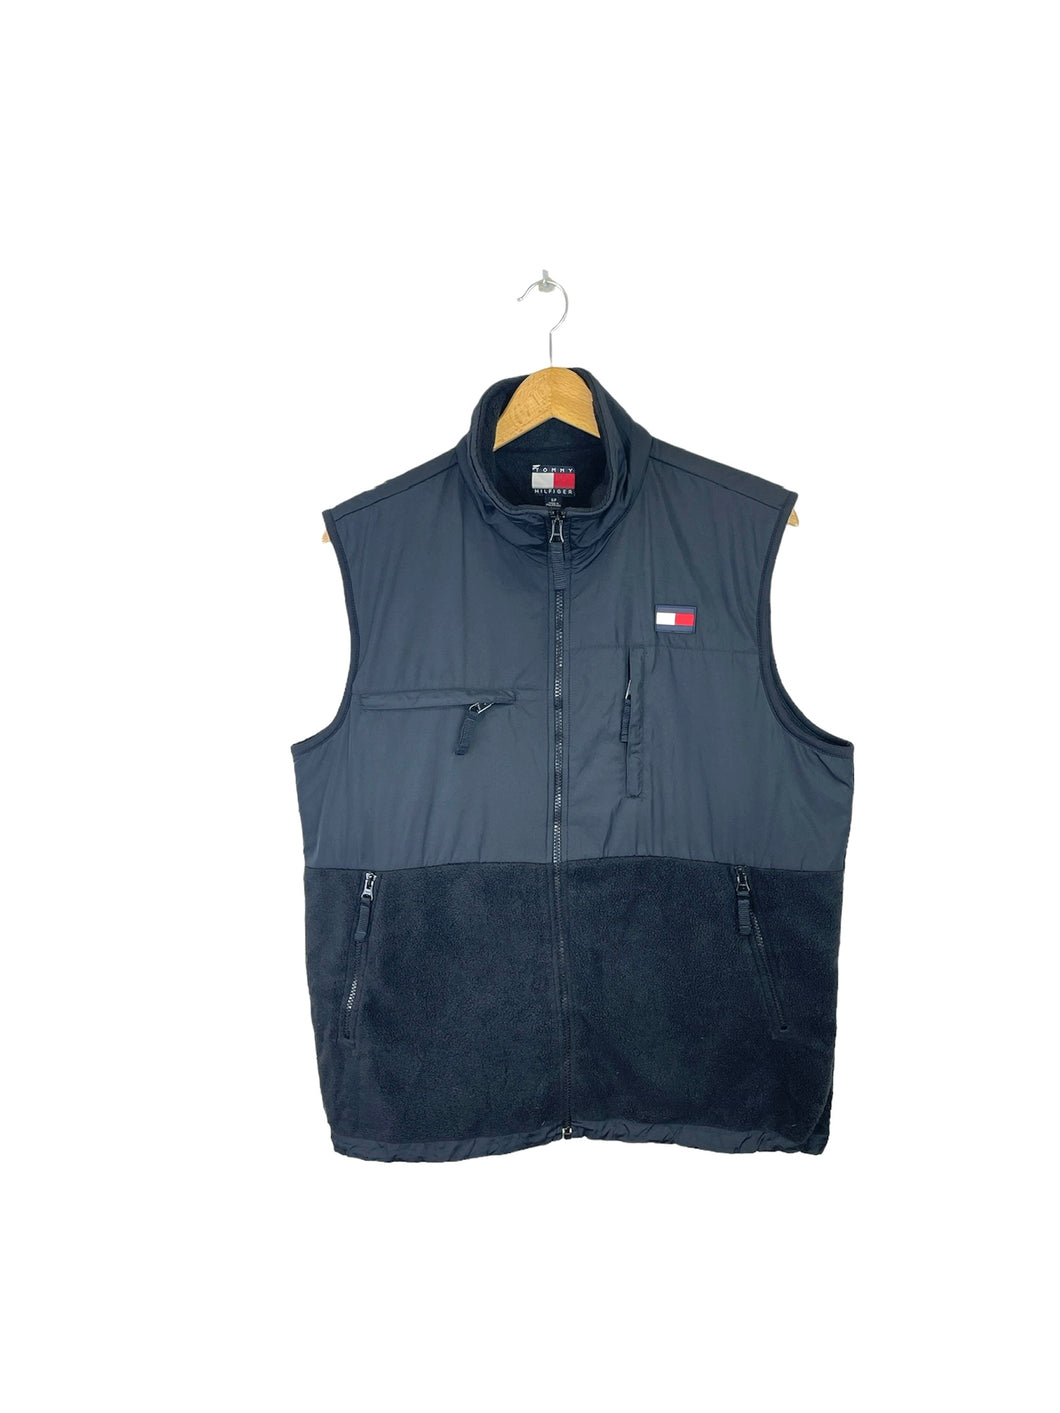 Tommy Hilfiger Technical Vest - Small